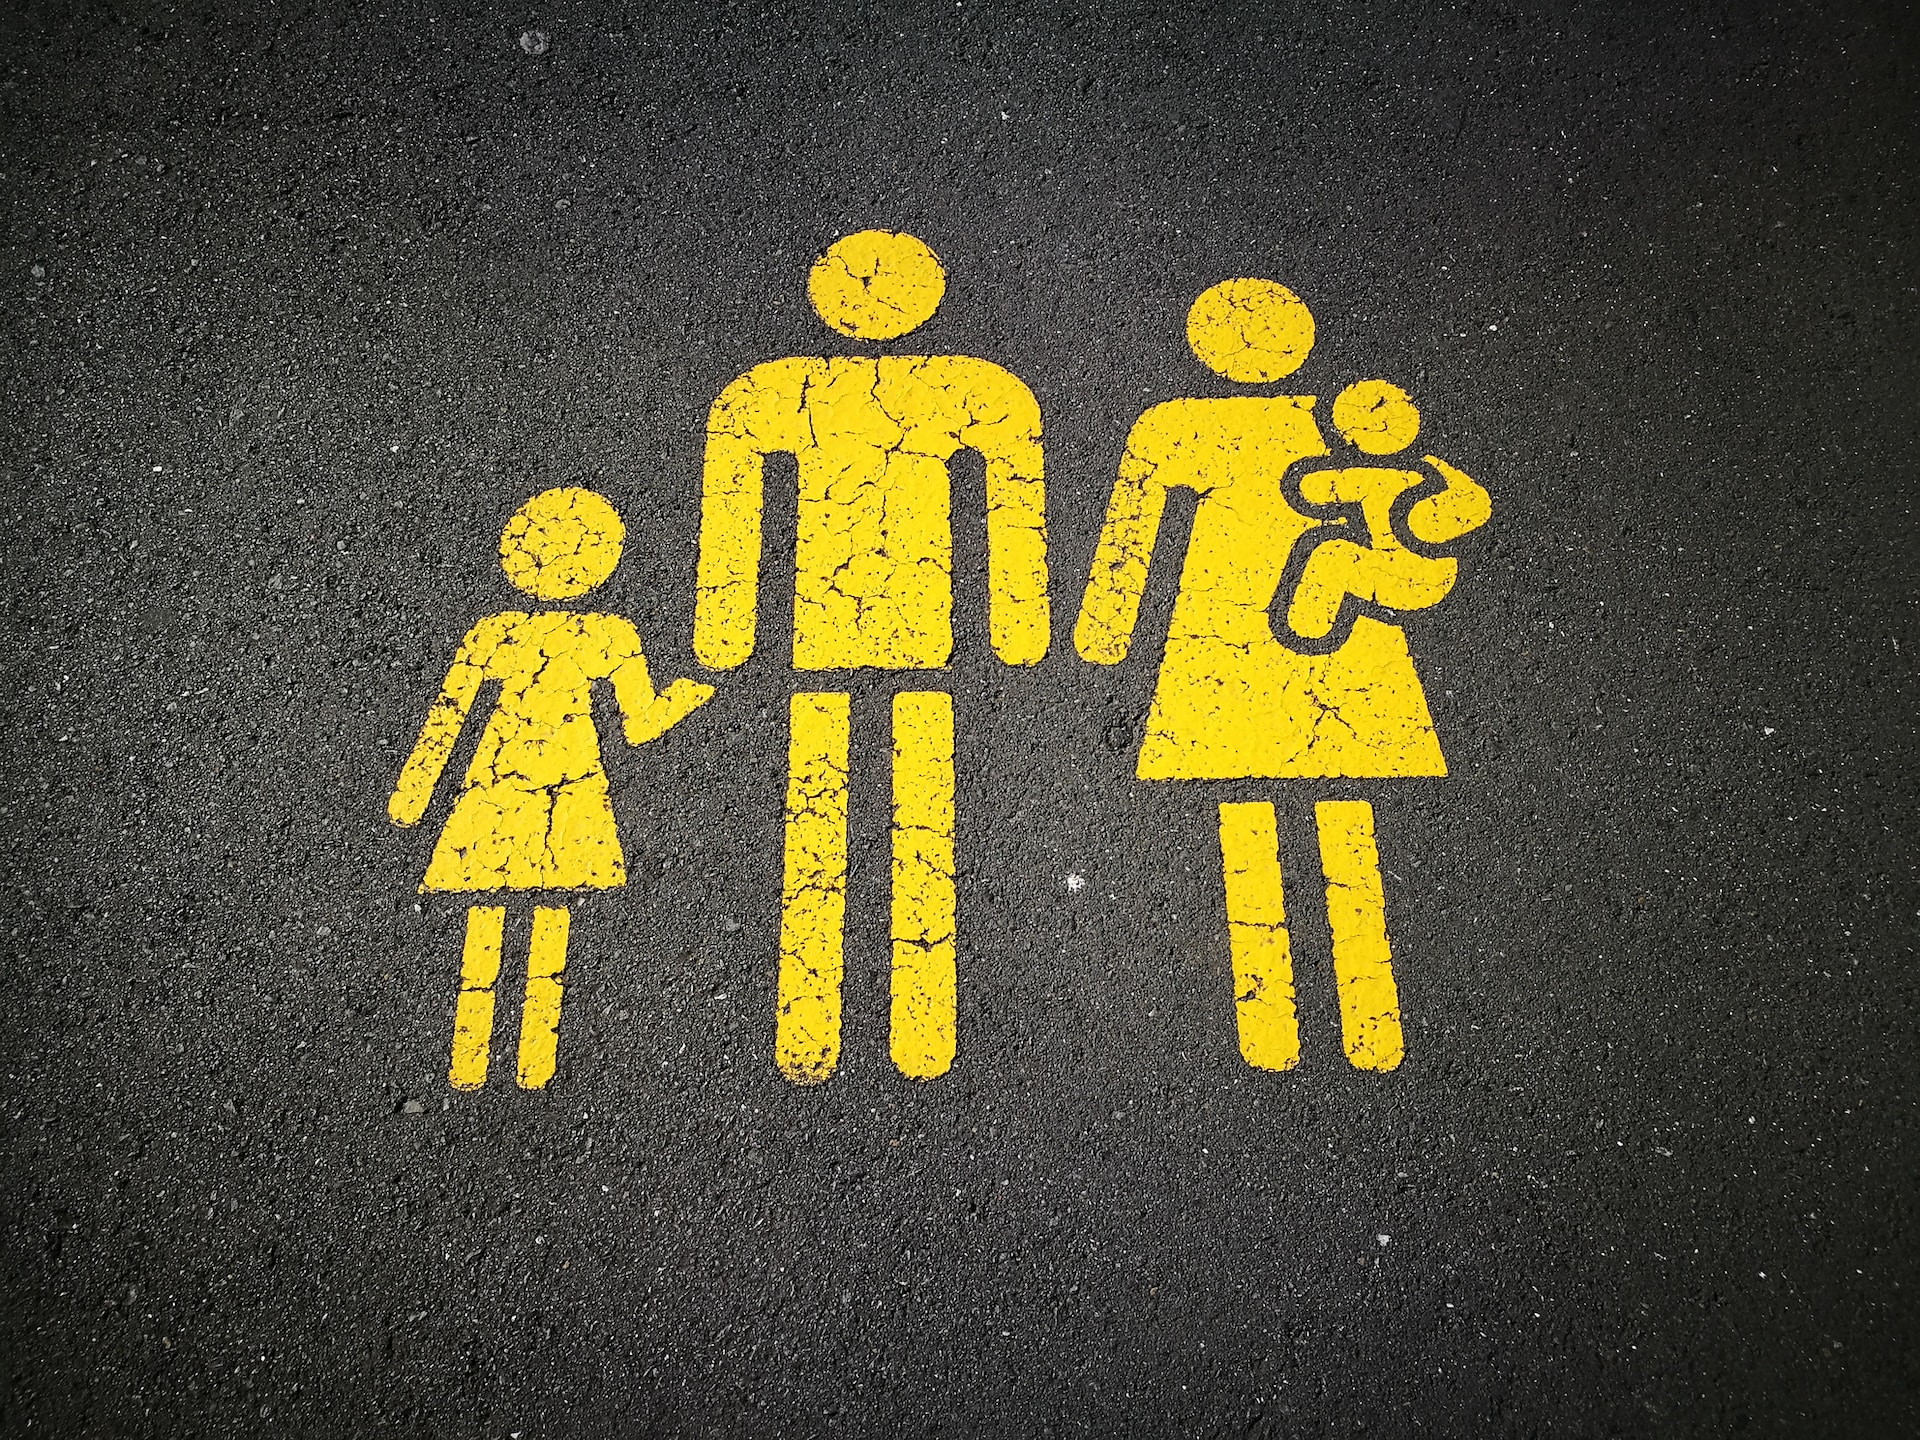 A street sign depicting a family